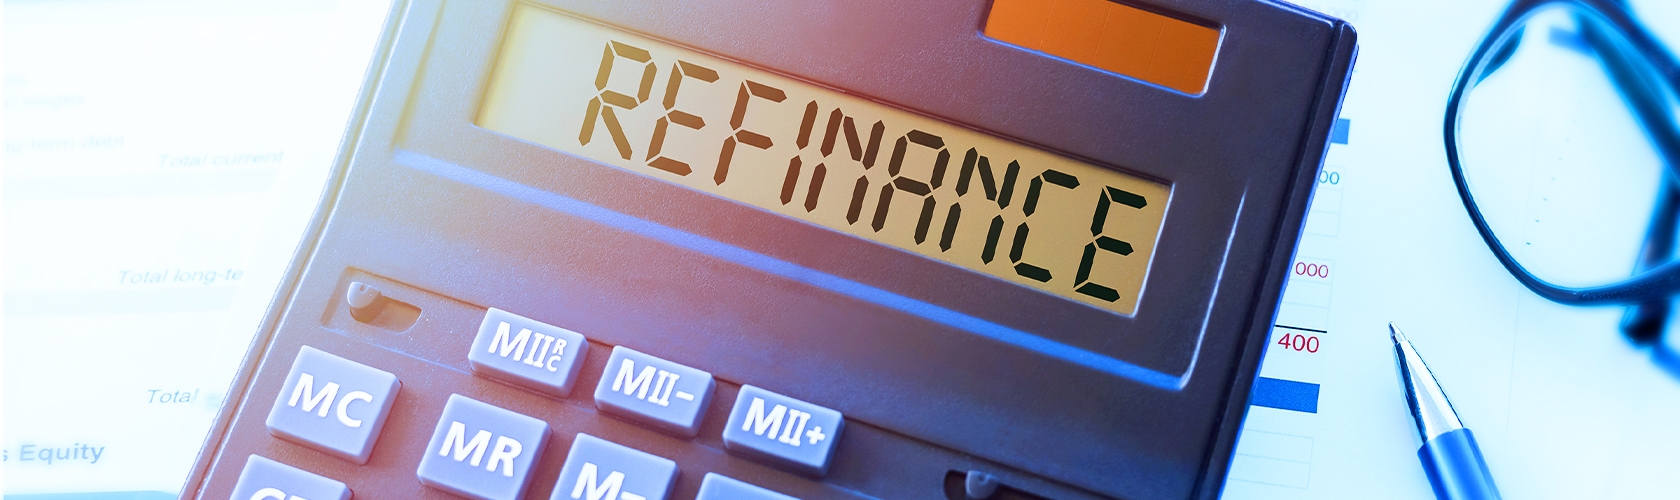 Close up view of calculator with word REFINANCE on screen